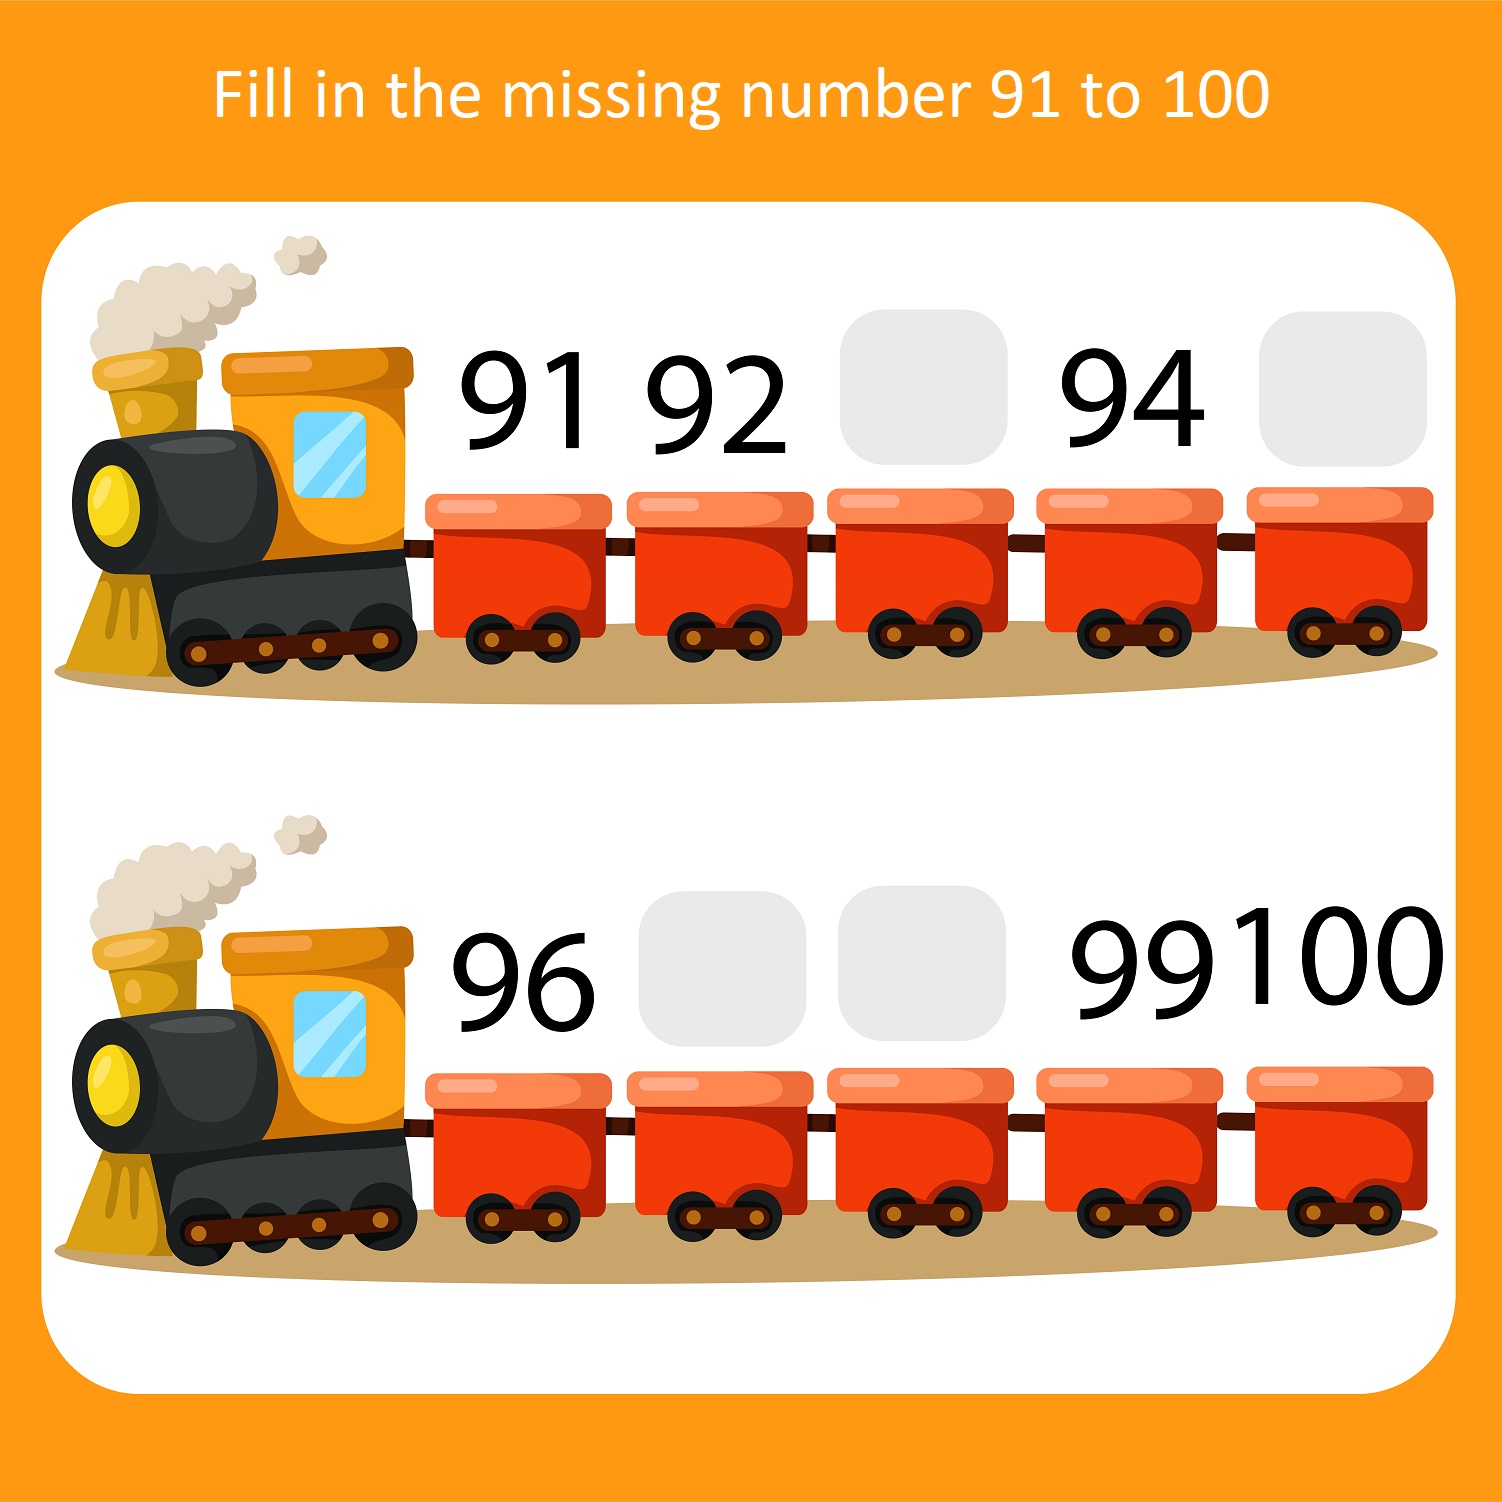 fill-in-the-missing-number-91-to-100-iworksheets-free-interactive-worksheets-powered-by-mj